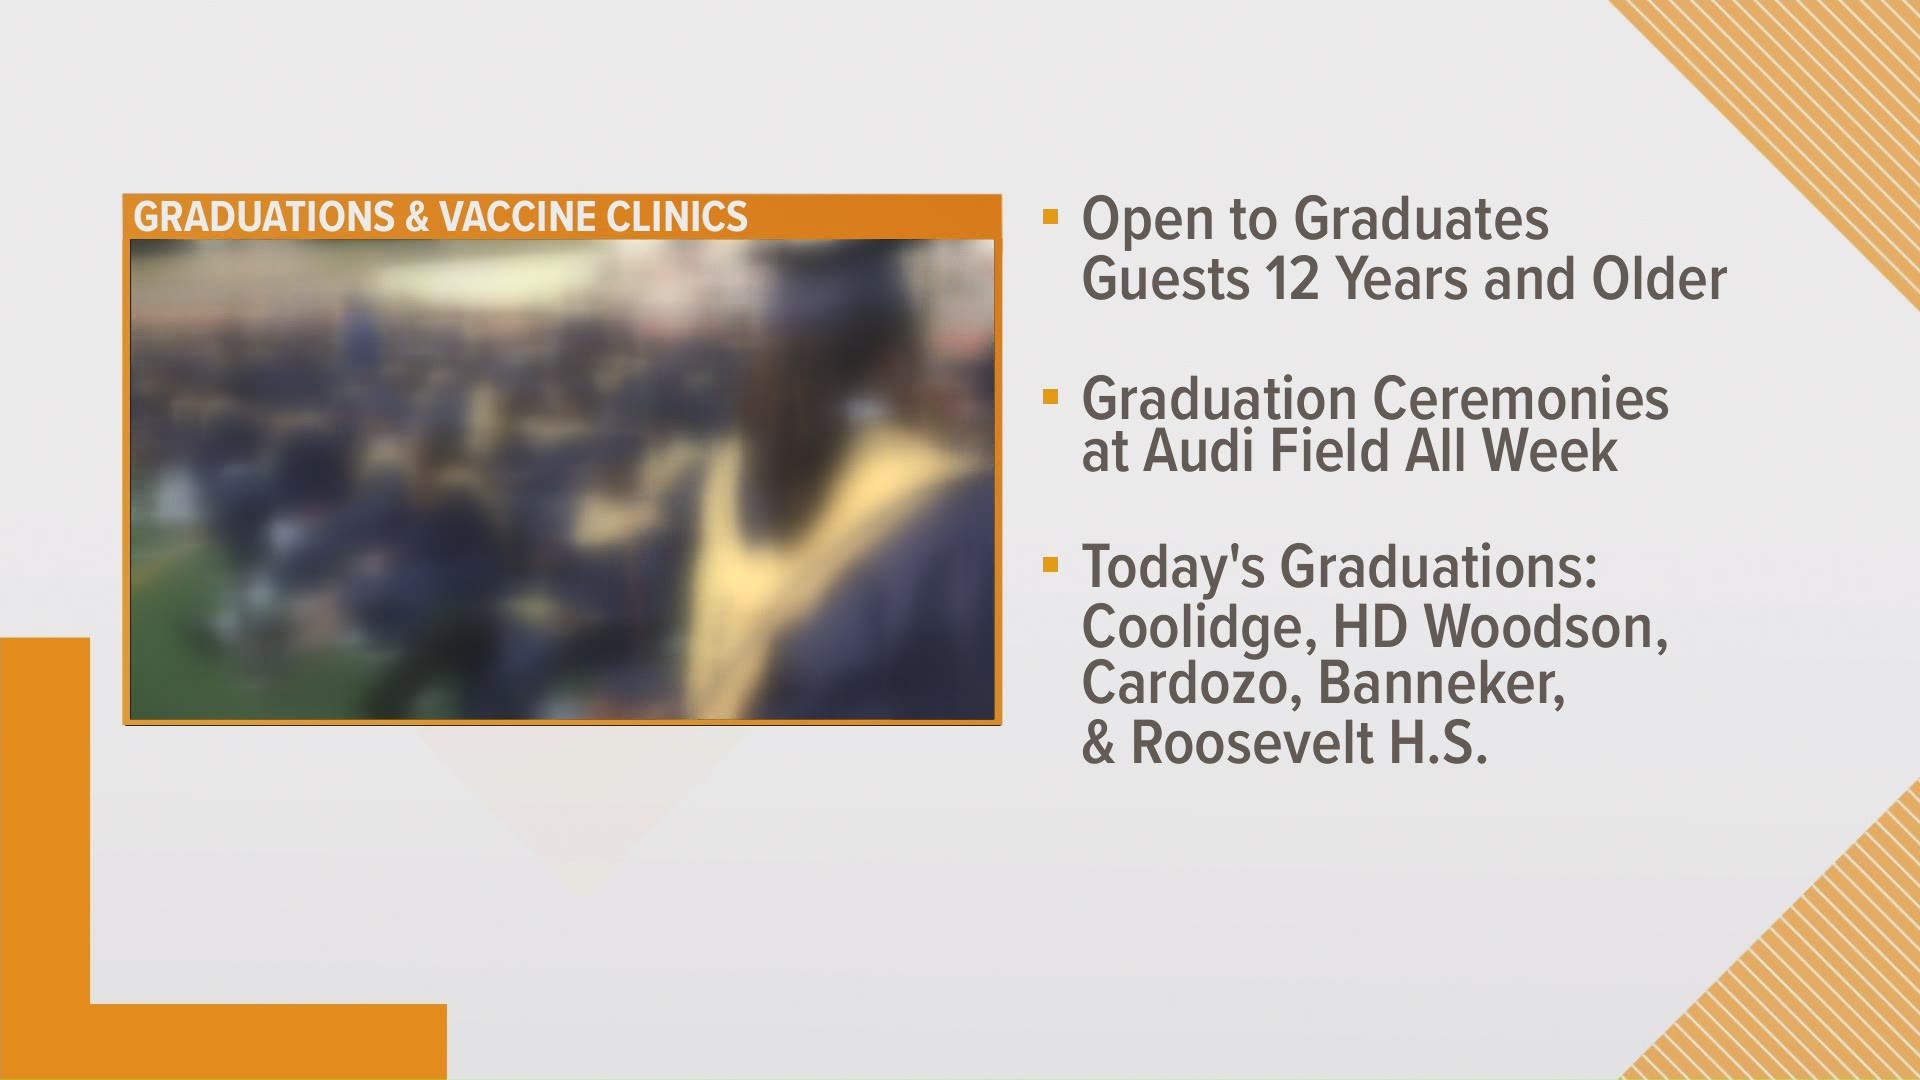 Graduates can walk across the stage, while family members get vaccinated against COVID-19.